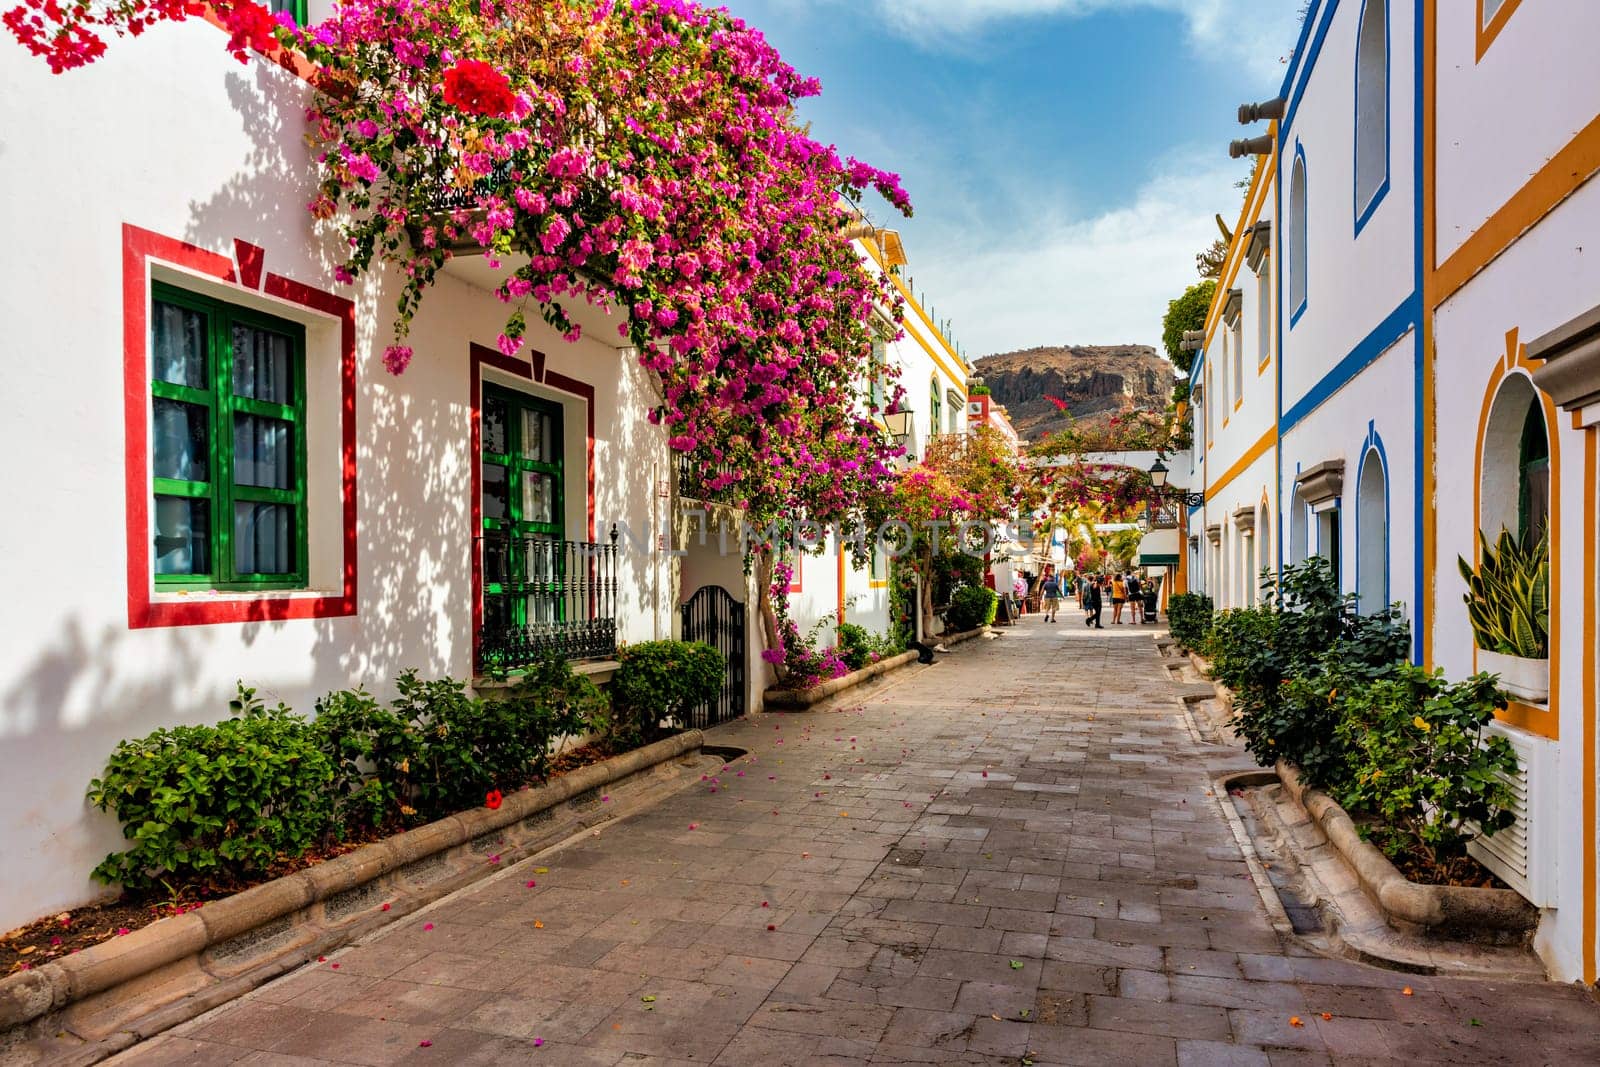 Street with blooming flowers in Puerto de Mogan, Gran Canaria, Spain. Favorite vacation place for tourists and locals on island. Puerto de Mogan with lots of bougainvillea flowers, Canary Island.